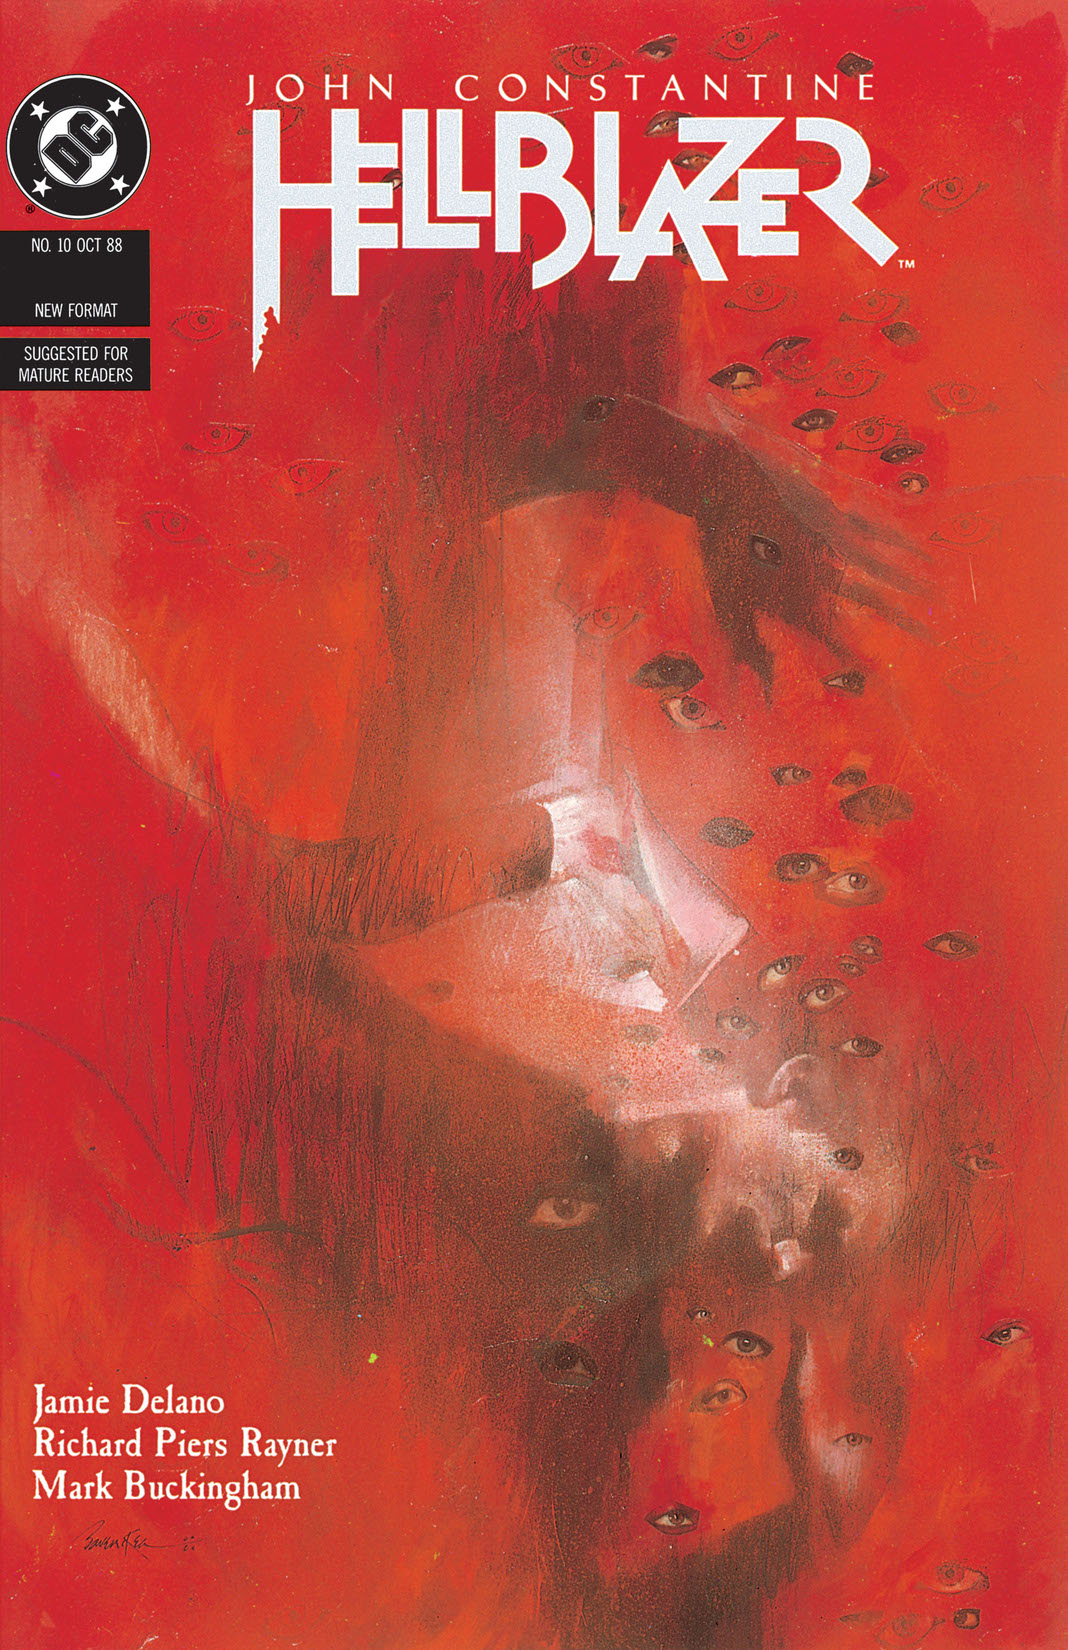 Hellblazer #10 preview images